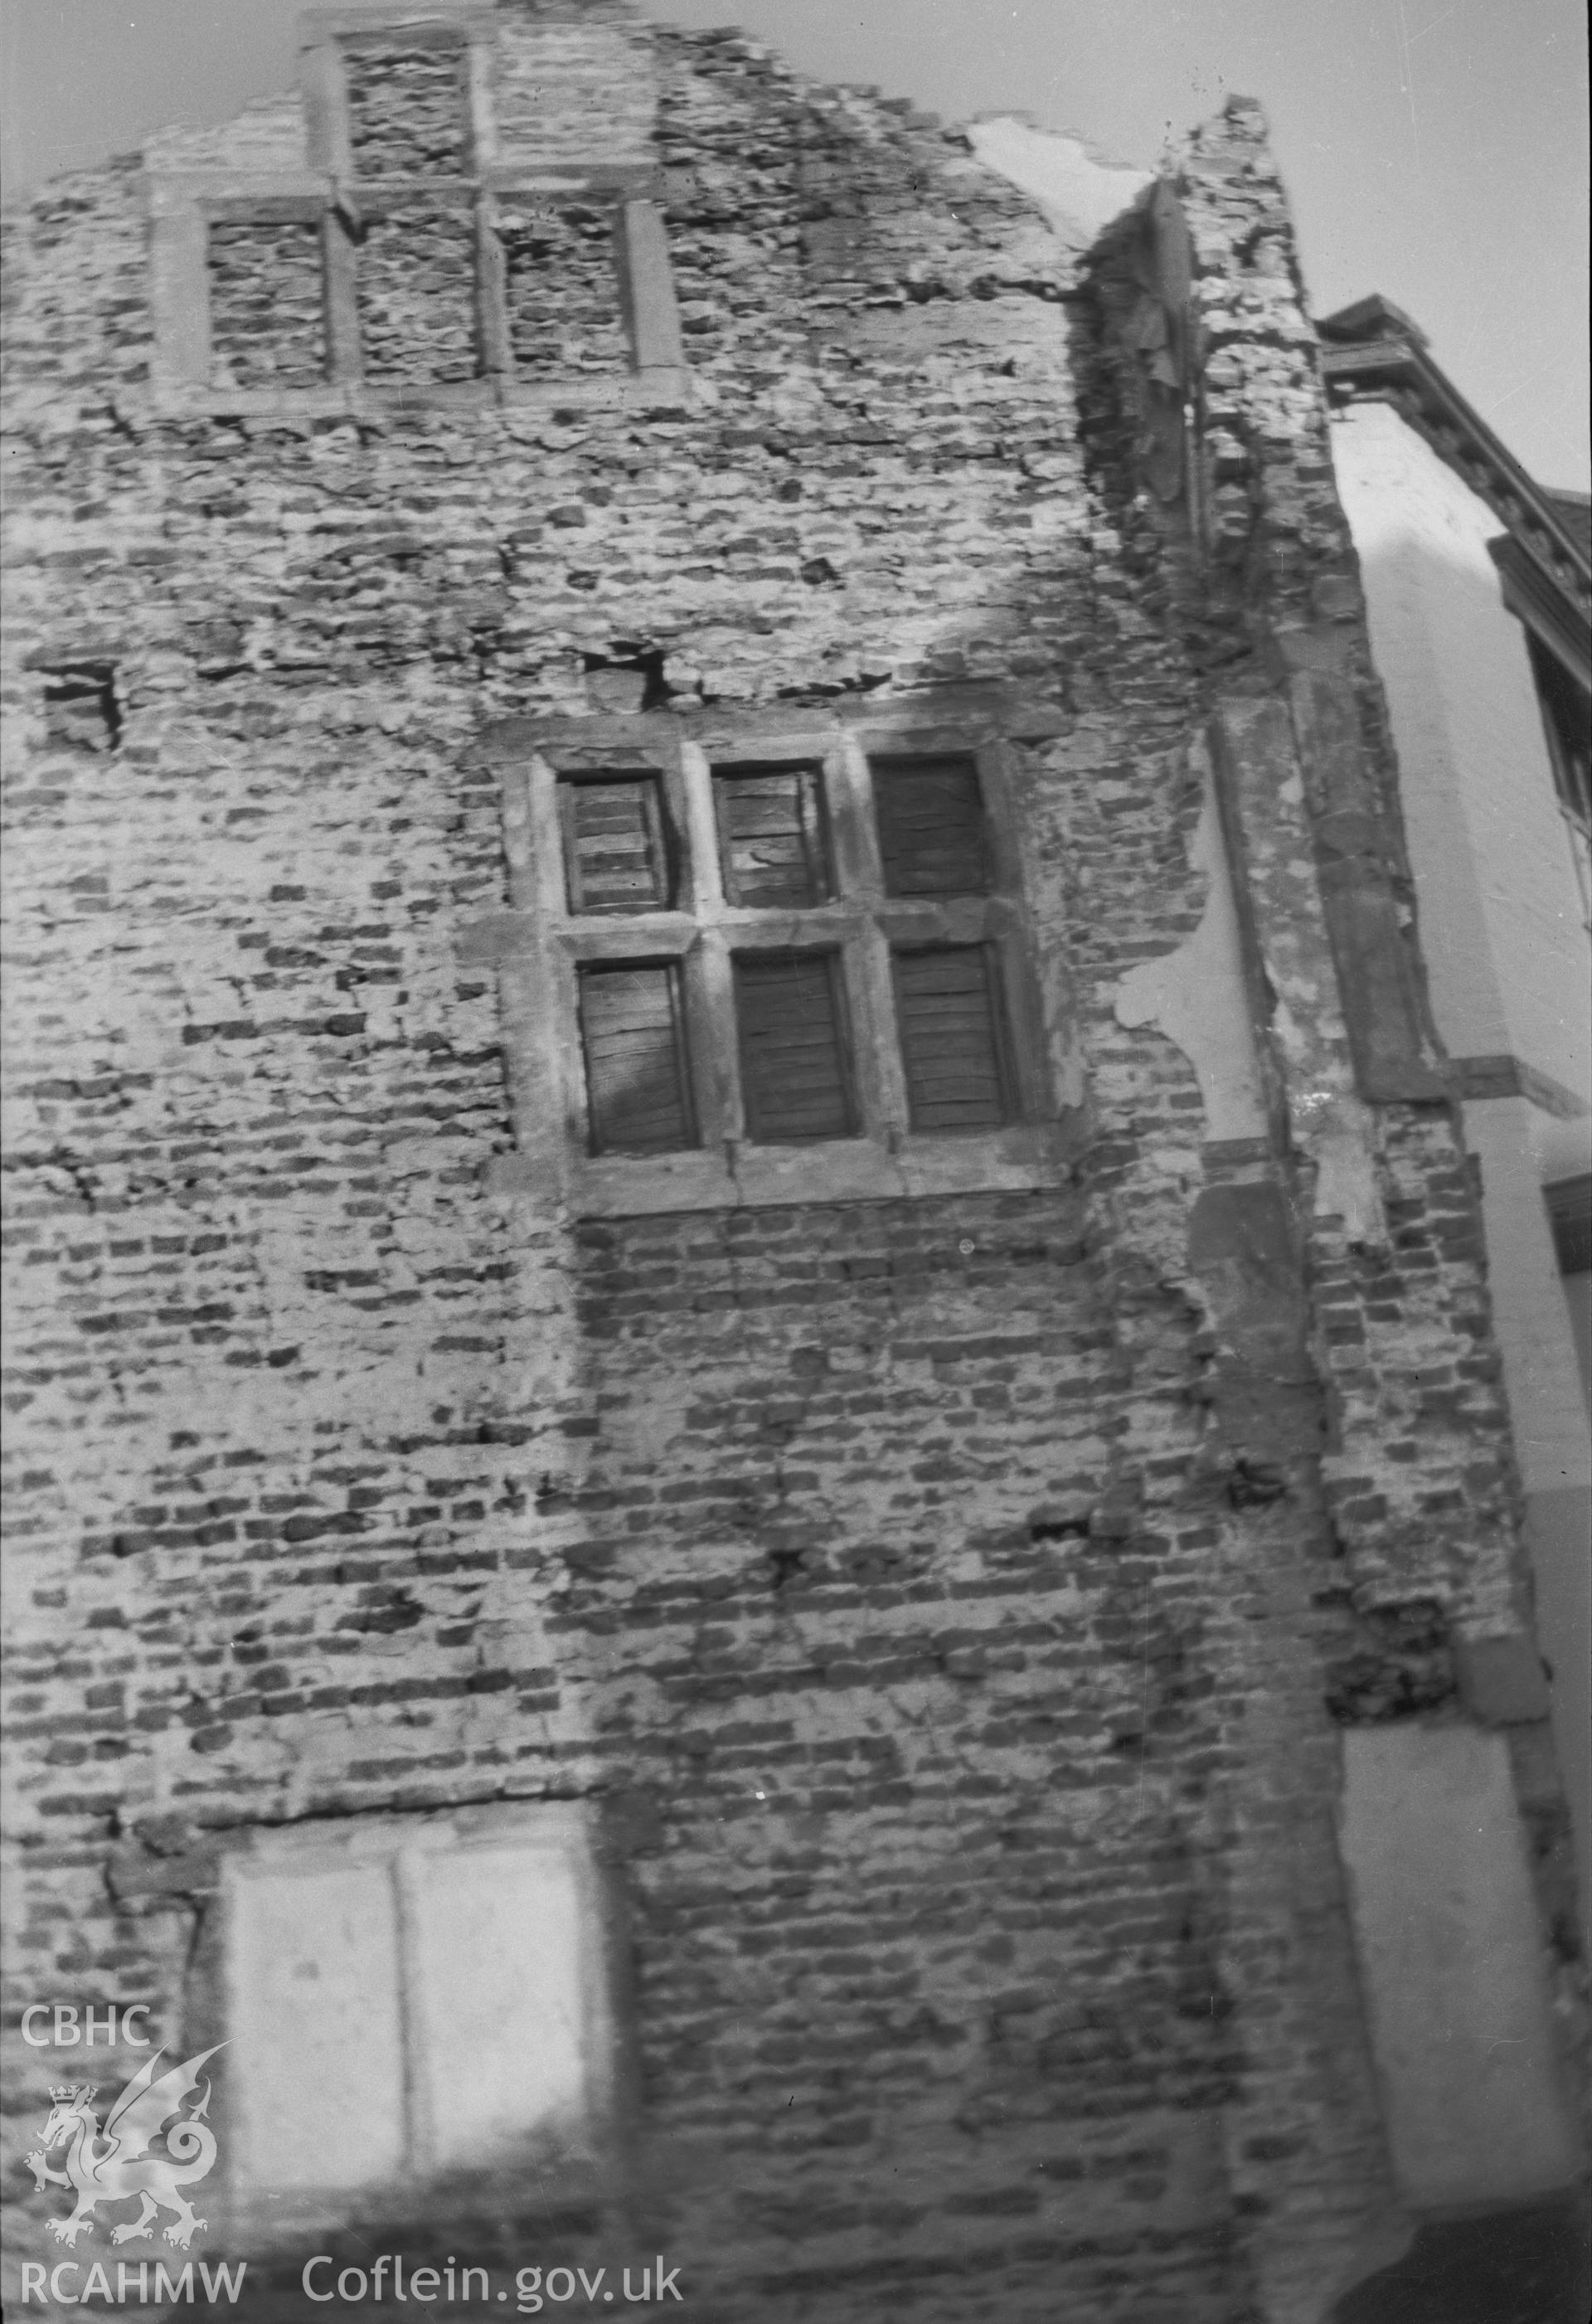 Digital copy of a nitrate negative showing the gable wall of an unidentified building in Wrexham, taken by RCAHMW.